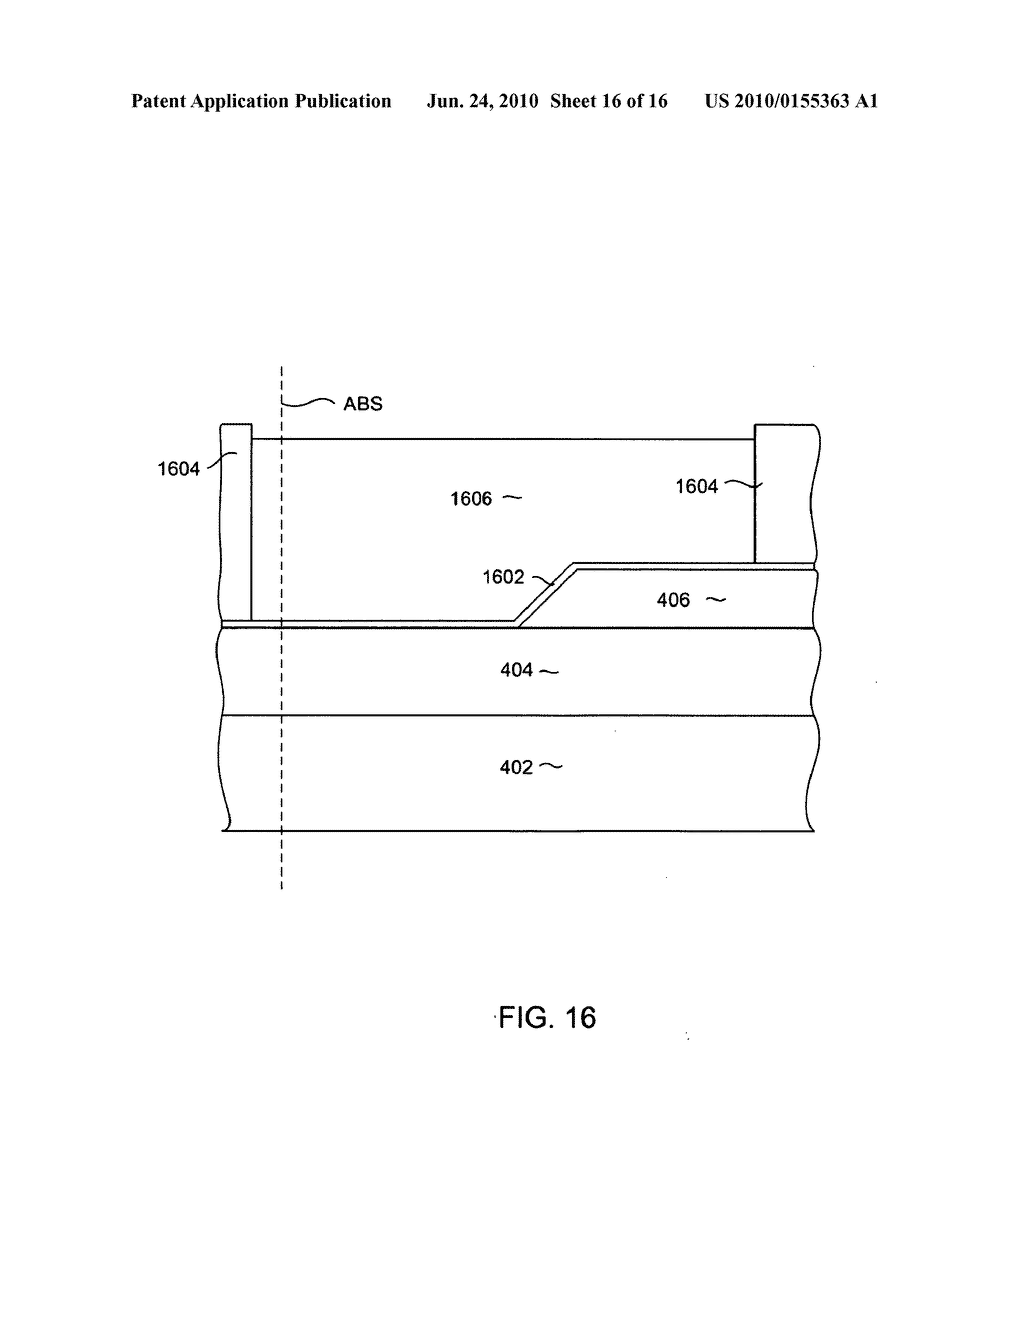 METHOD FOR MANUFACTURING A MAGNETIC WRITE HEAD HAVING A WRITE POLE WITH A TRAILING EDGE TAPER USING A RIEABLE HARD MASK - diagram, schematic, and image 17